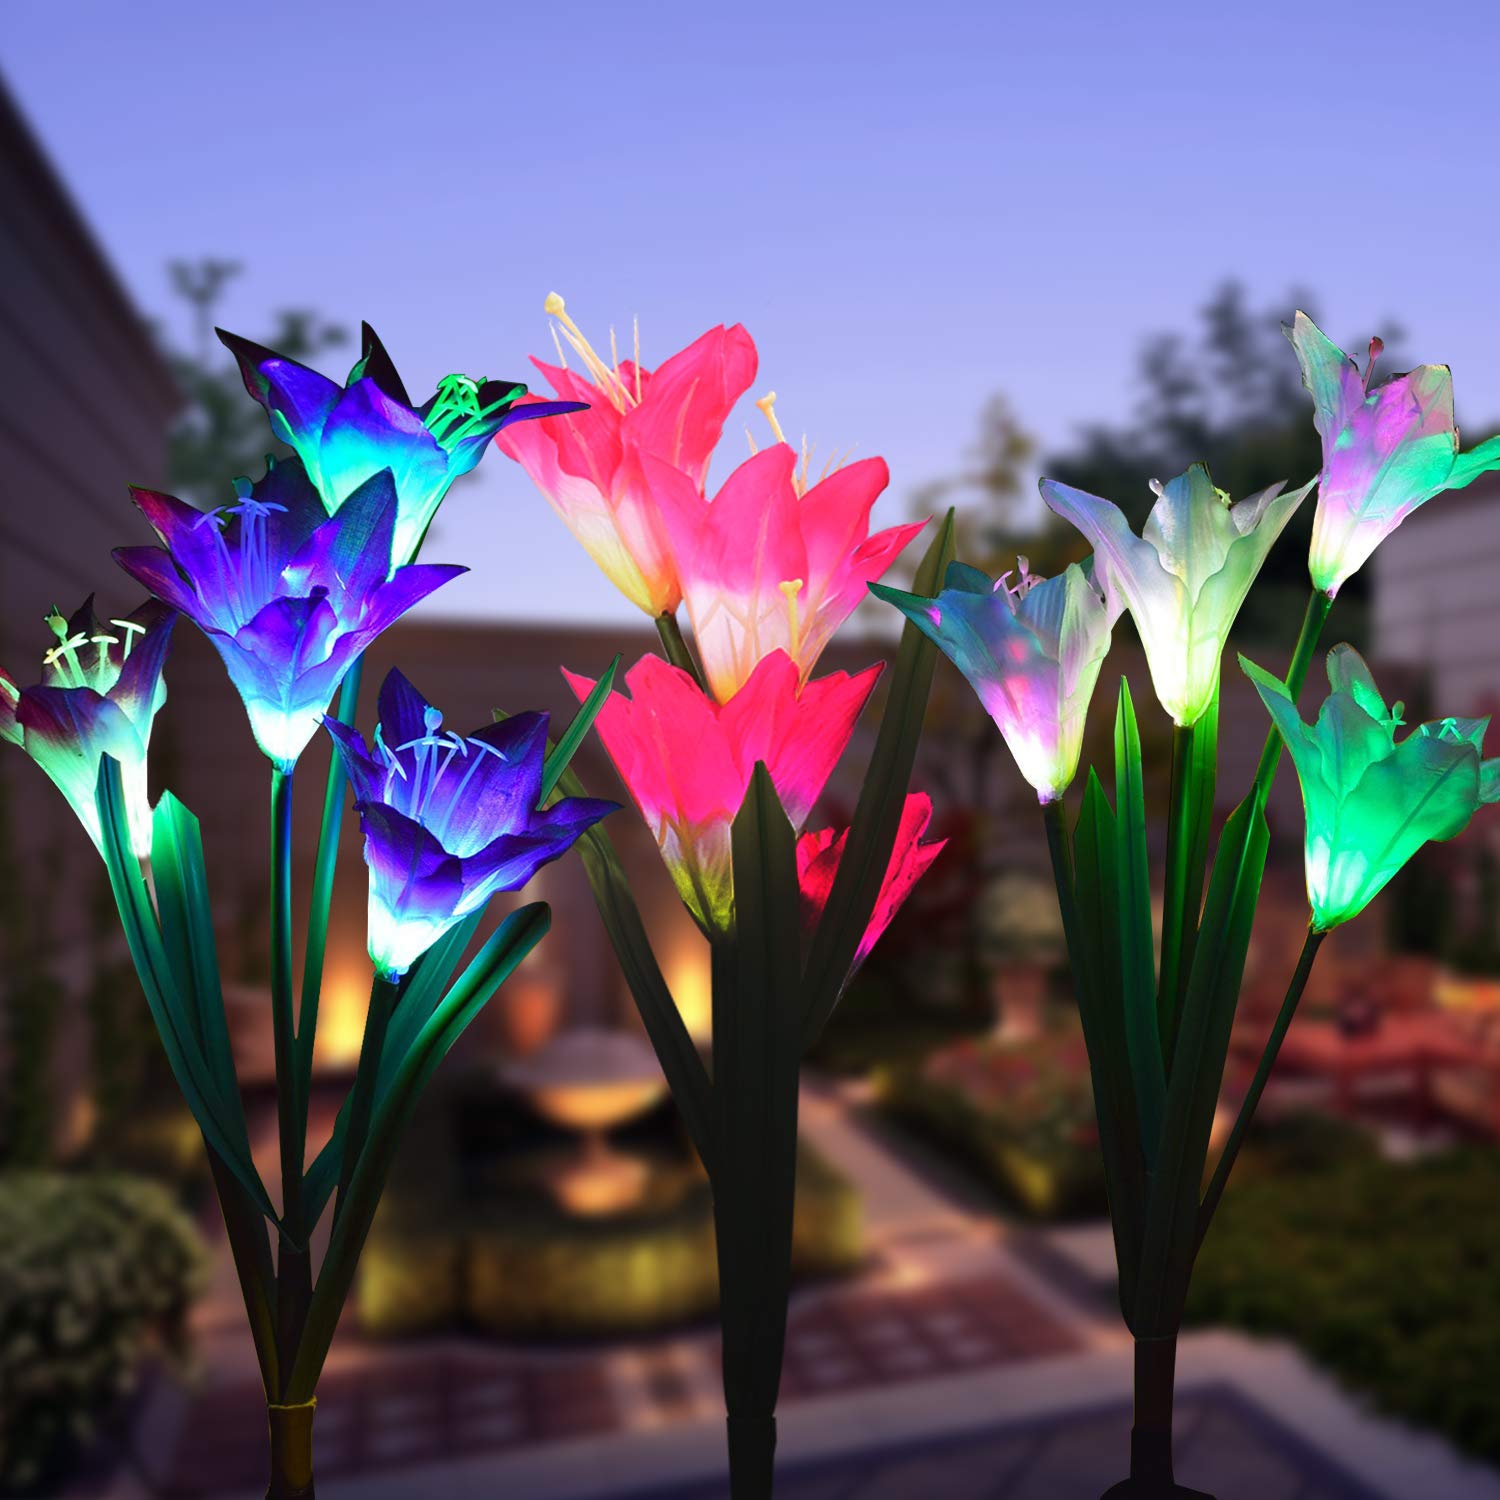 Outdoor Solar Garden Stake Lights, 2 Pack Solar Powered Lights with 8 Lily Flower, Multi-Color Changing LED Solar Landscape Lighting Light for Garden, Patio (Outdoor Solar Garden Stake Lights-2) - image 1 of 5